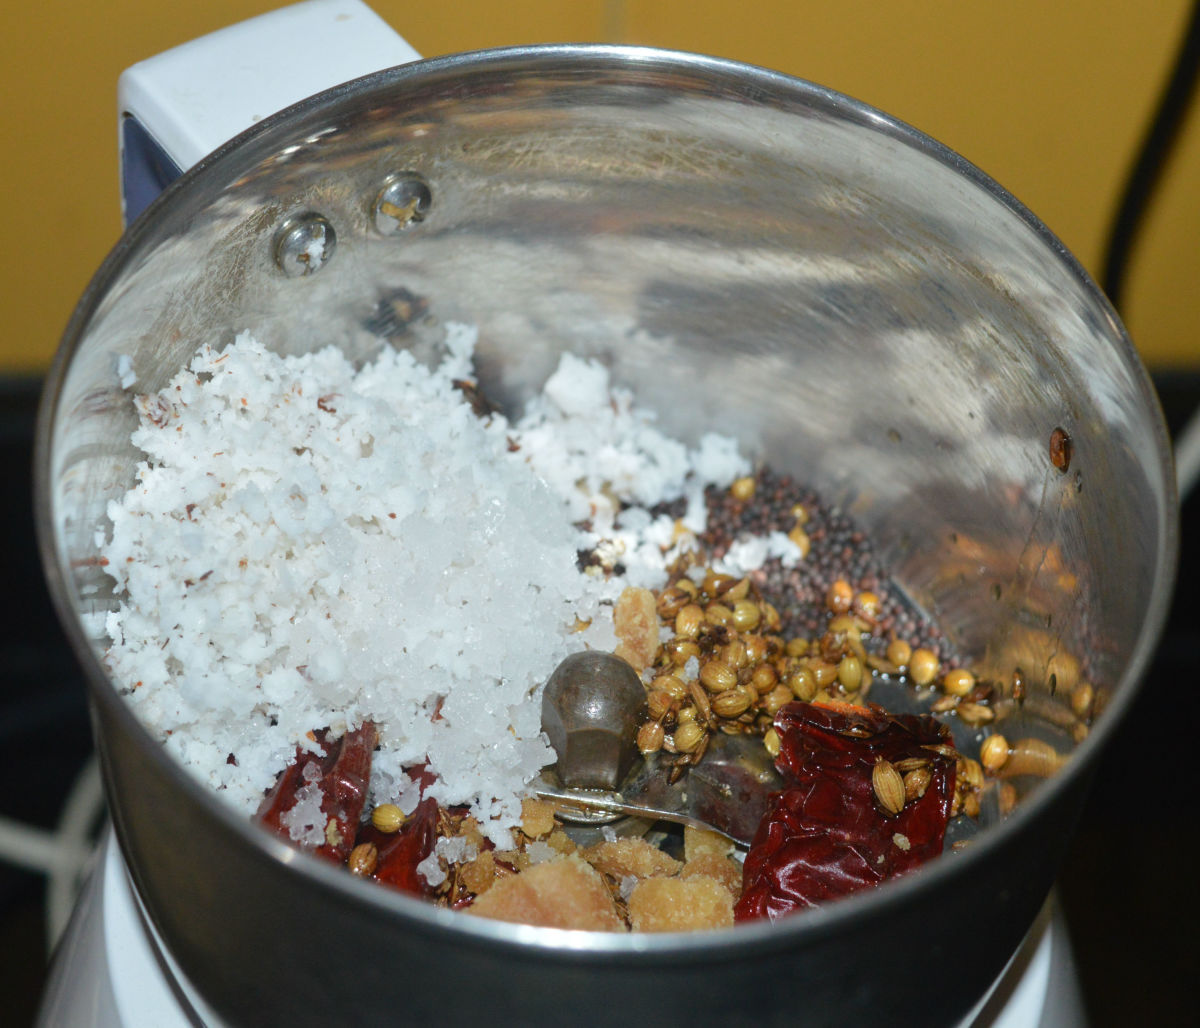 Add half of the grated coconut, jaggery powder, mustard seeds, and salt.